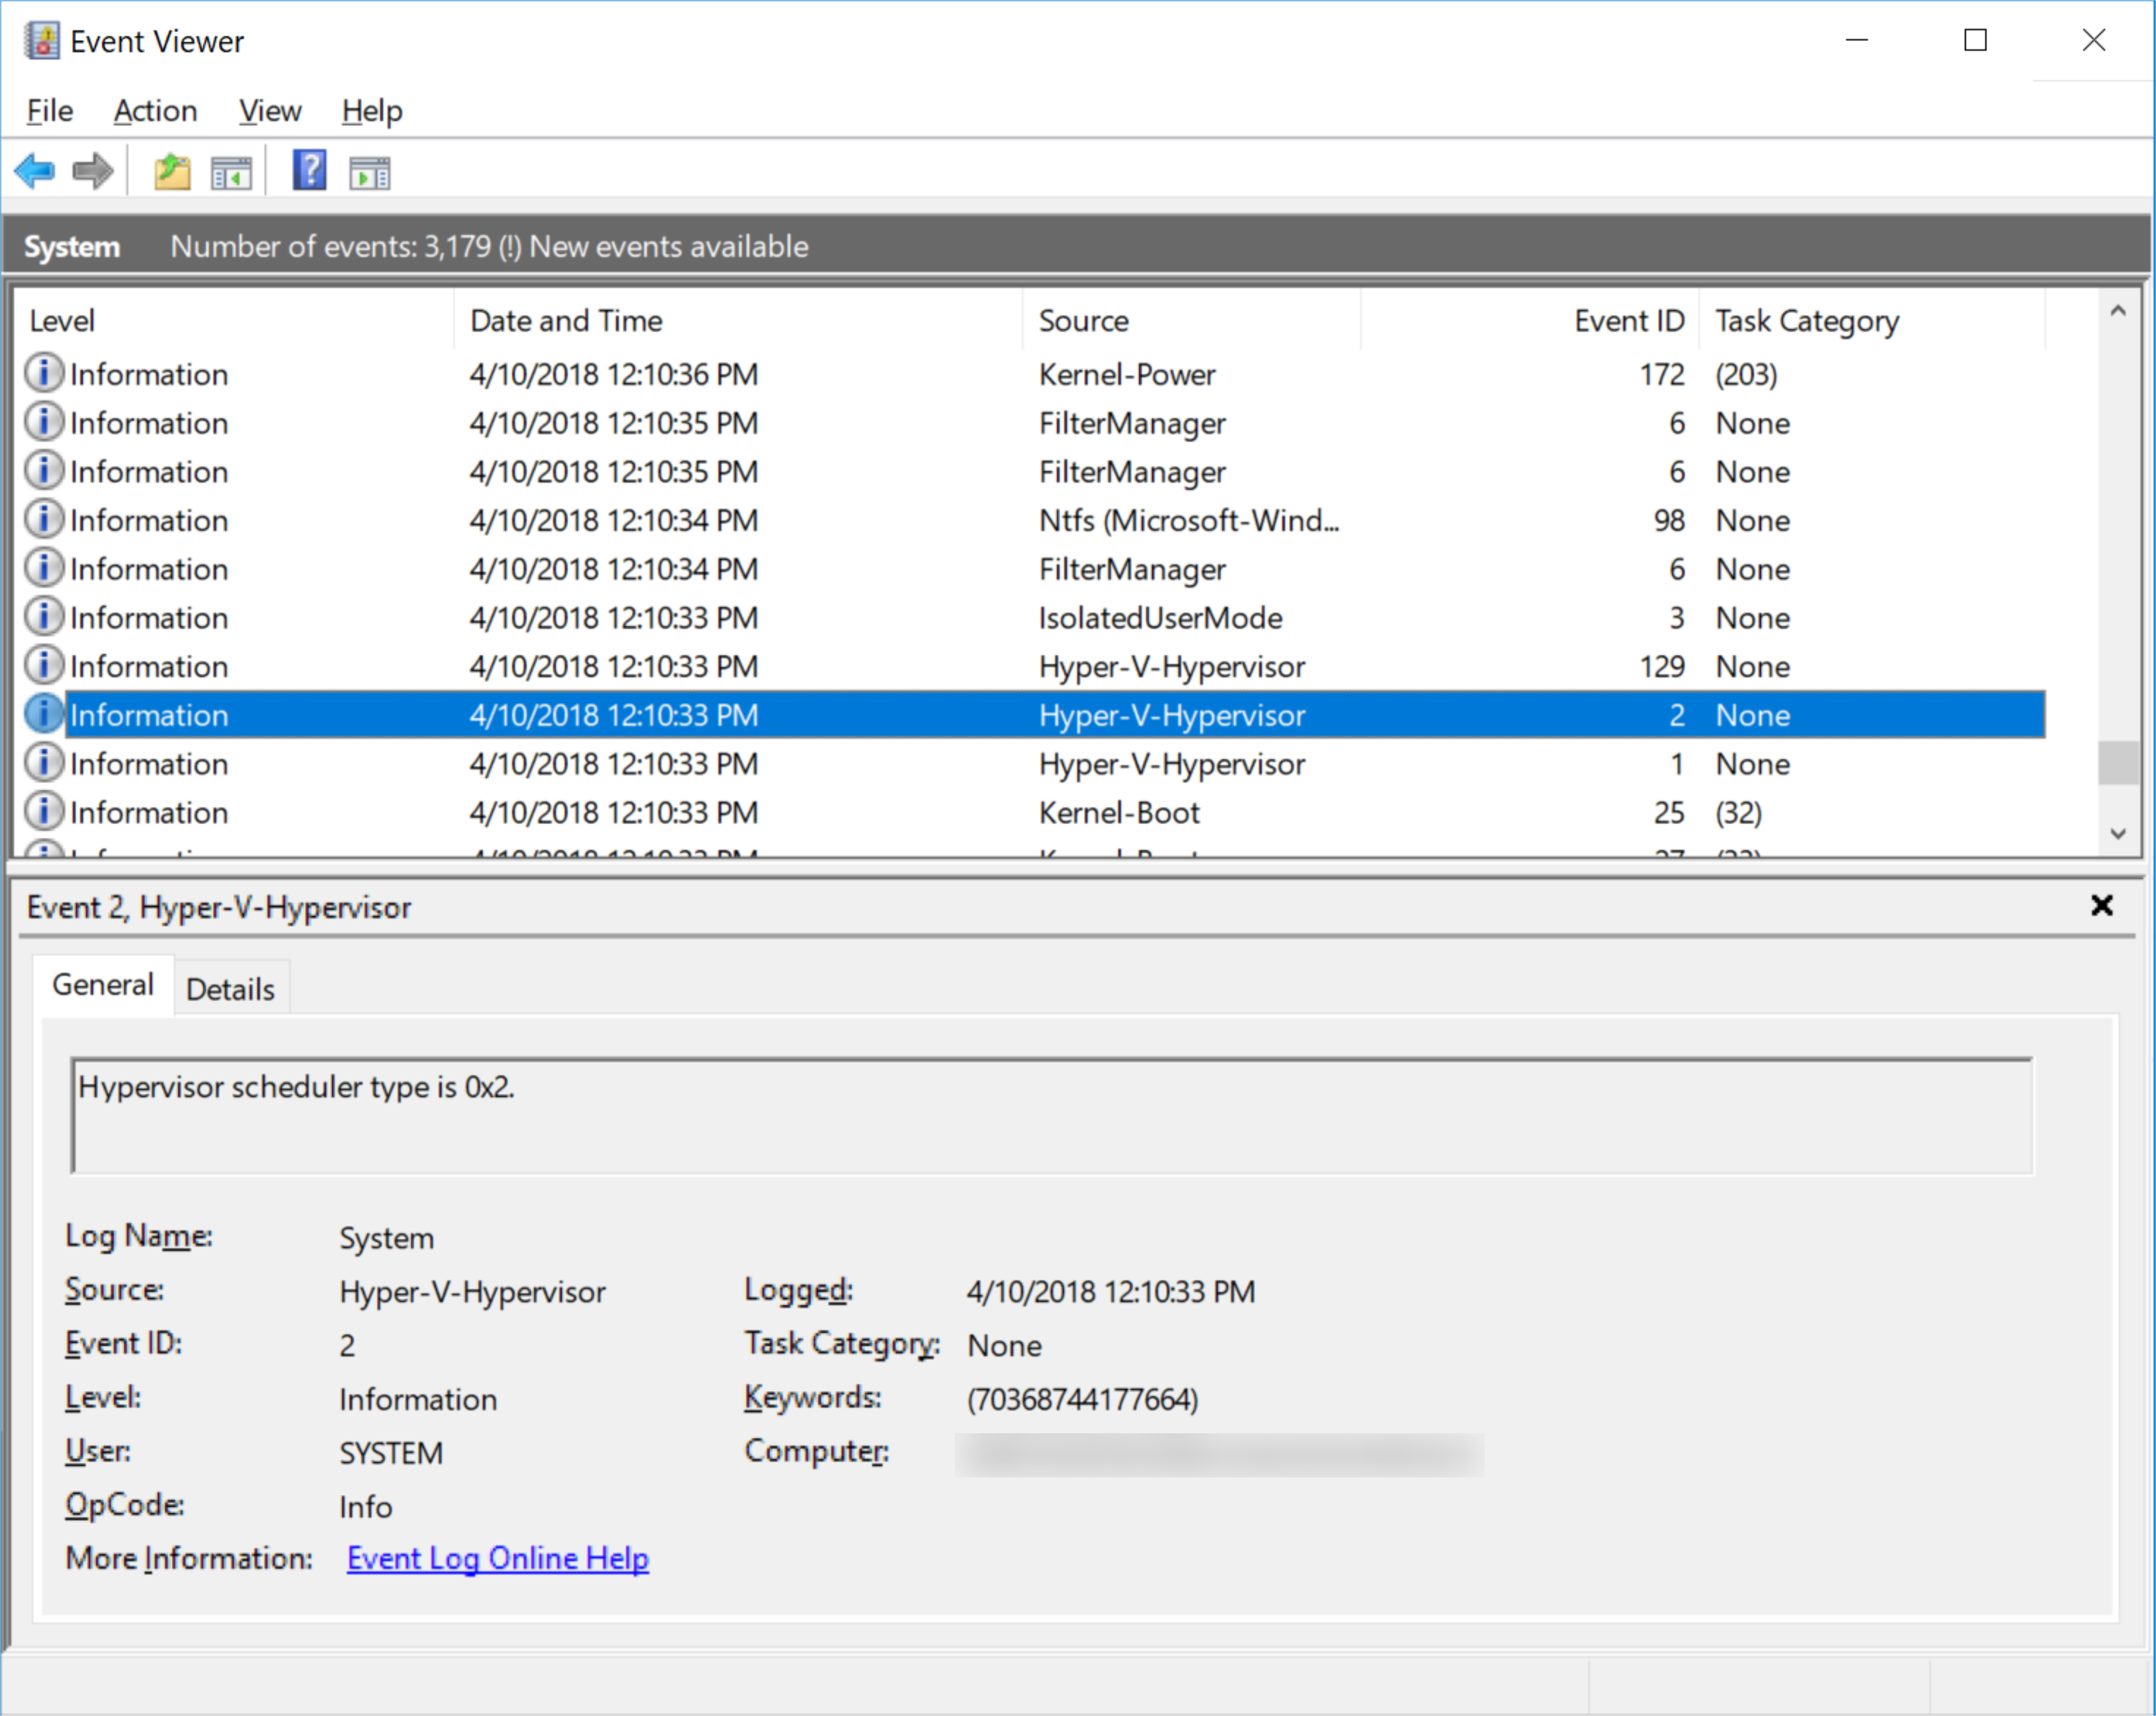 A screenshot of the Event Viewer window. The user has selected Hyper-V Hypervisor launch event ID 2 from the list of events, highlighting it in dark blue.